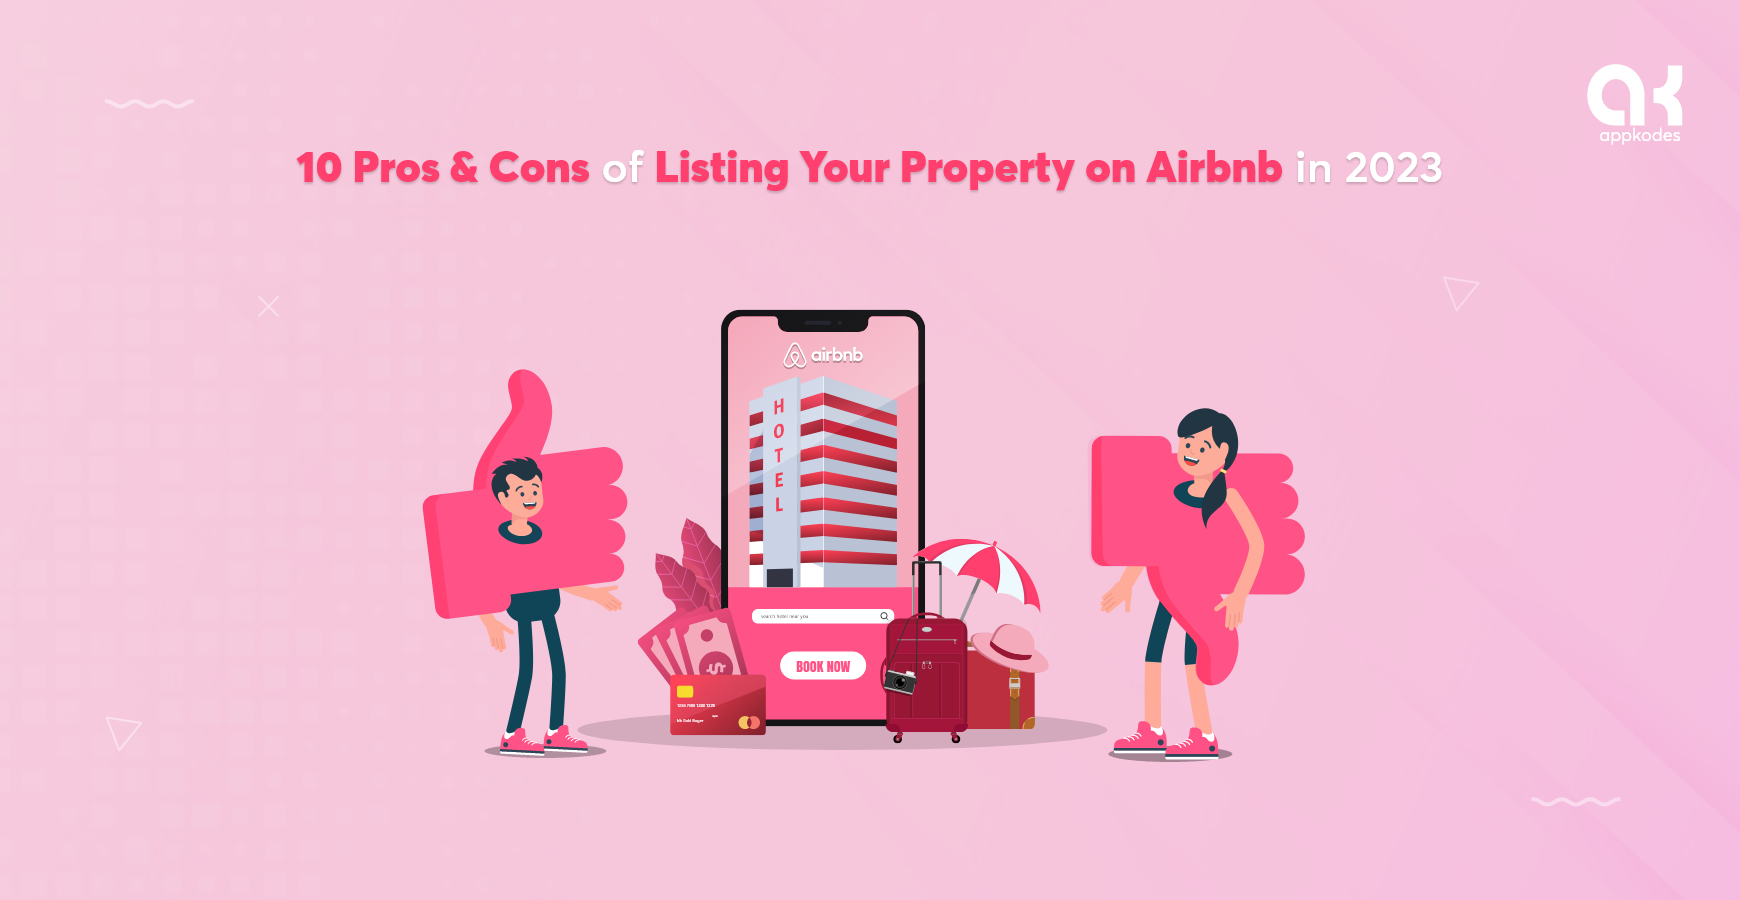 10 Pros & Cons of Listing Your Property on Airbnb in 2023